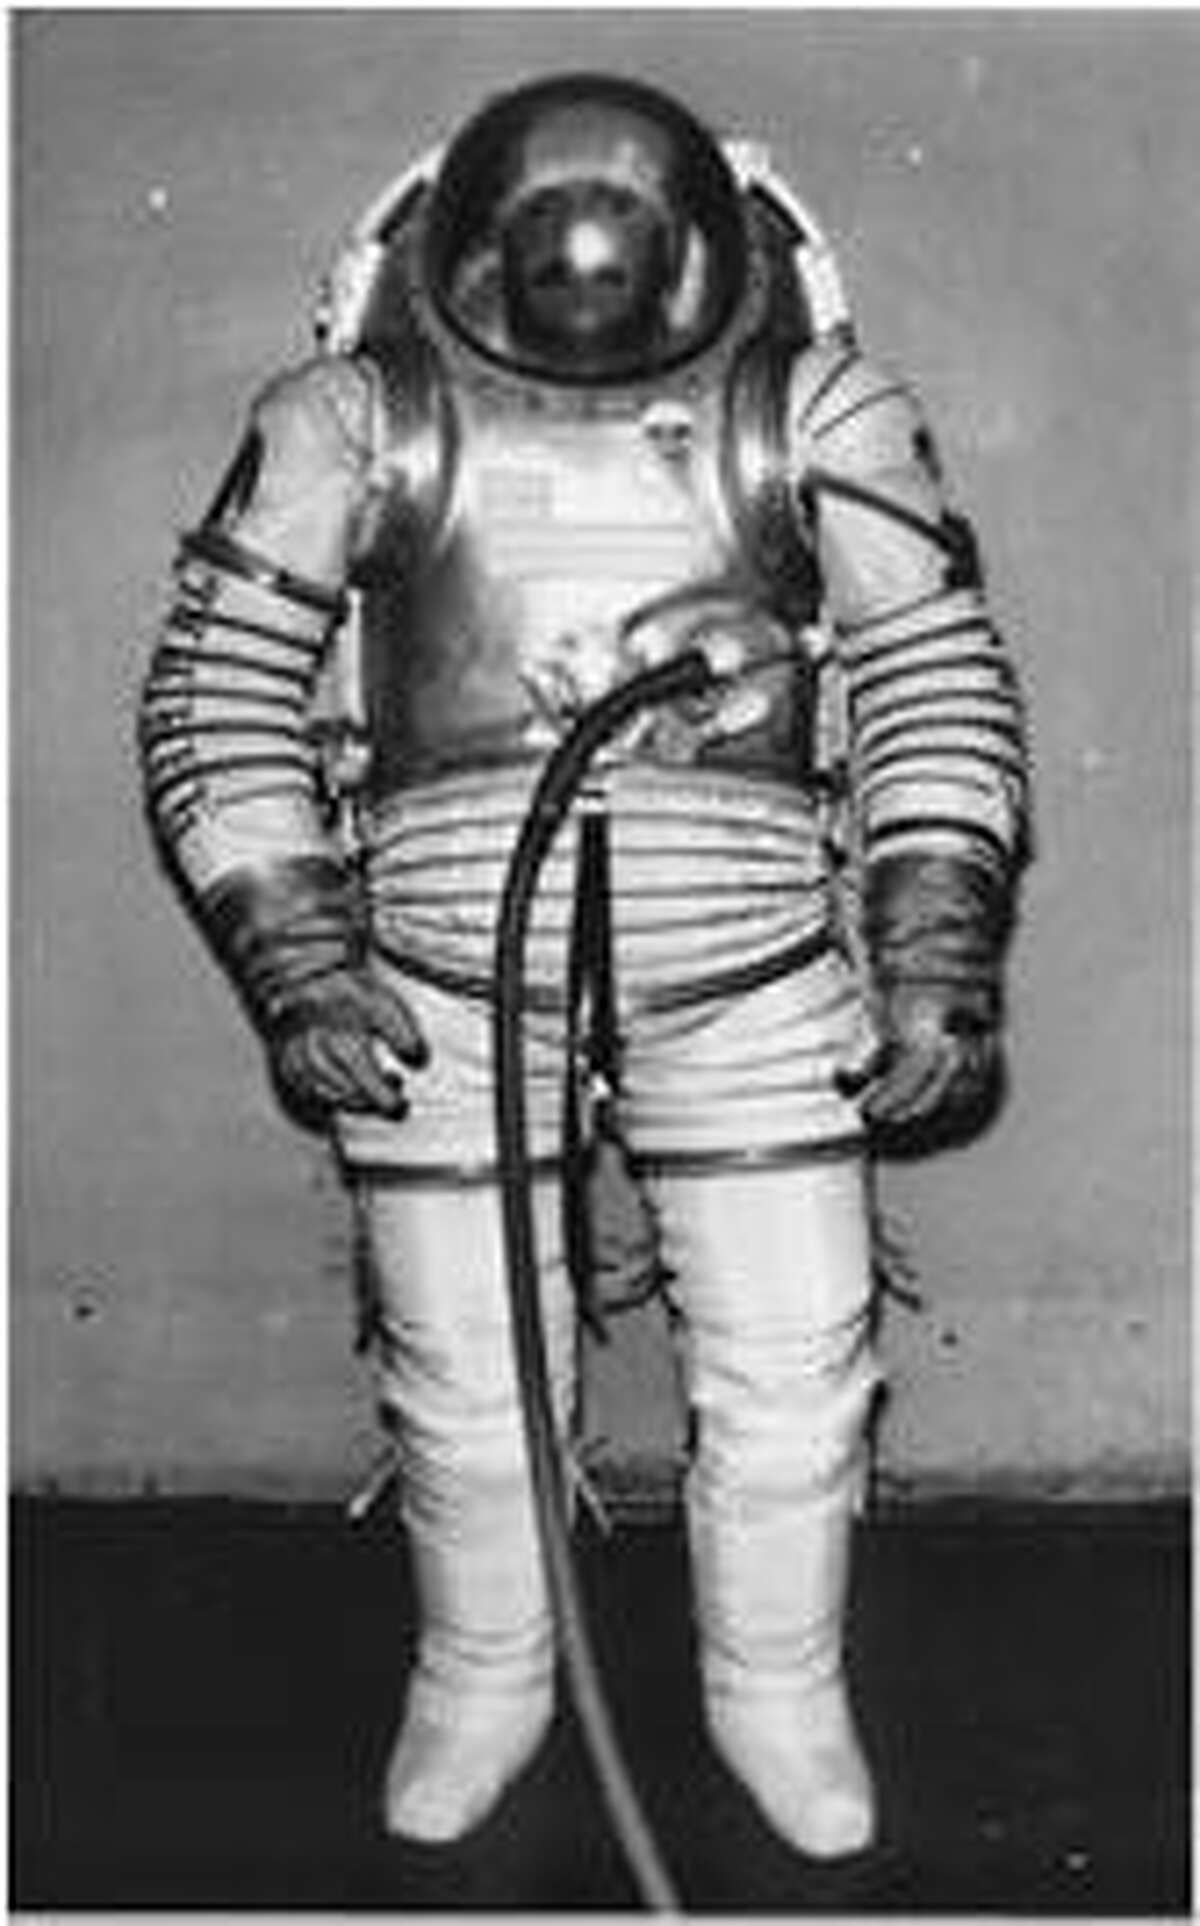 Nikolay Moiseev, lead designer and chief engineer at Final Frontier Designs is coming to the Greenwich Library’s Cole Auditorium on Feb. 25 to speak about the history and evolution of space suit designs.